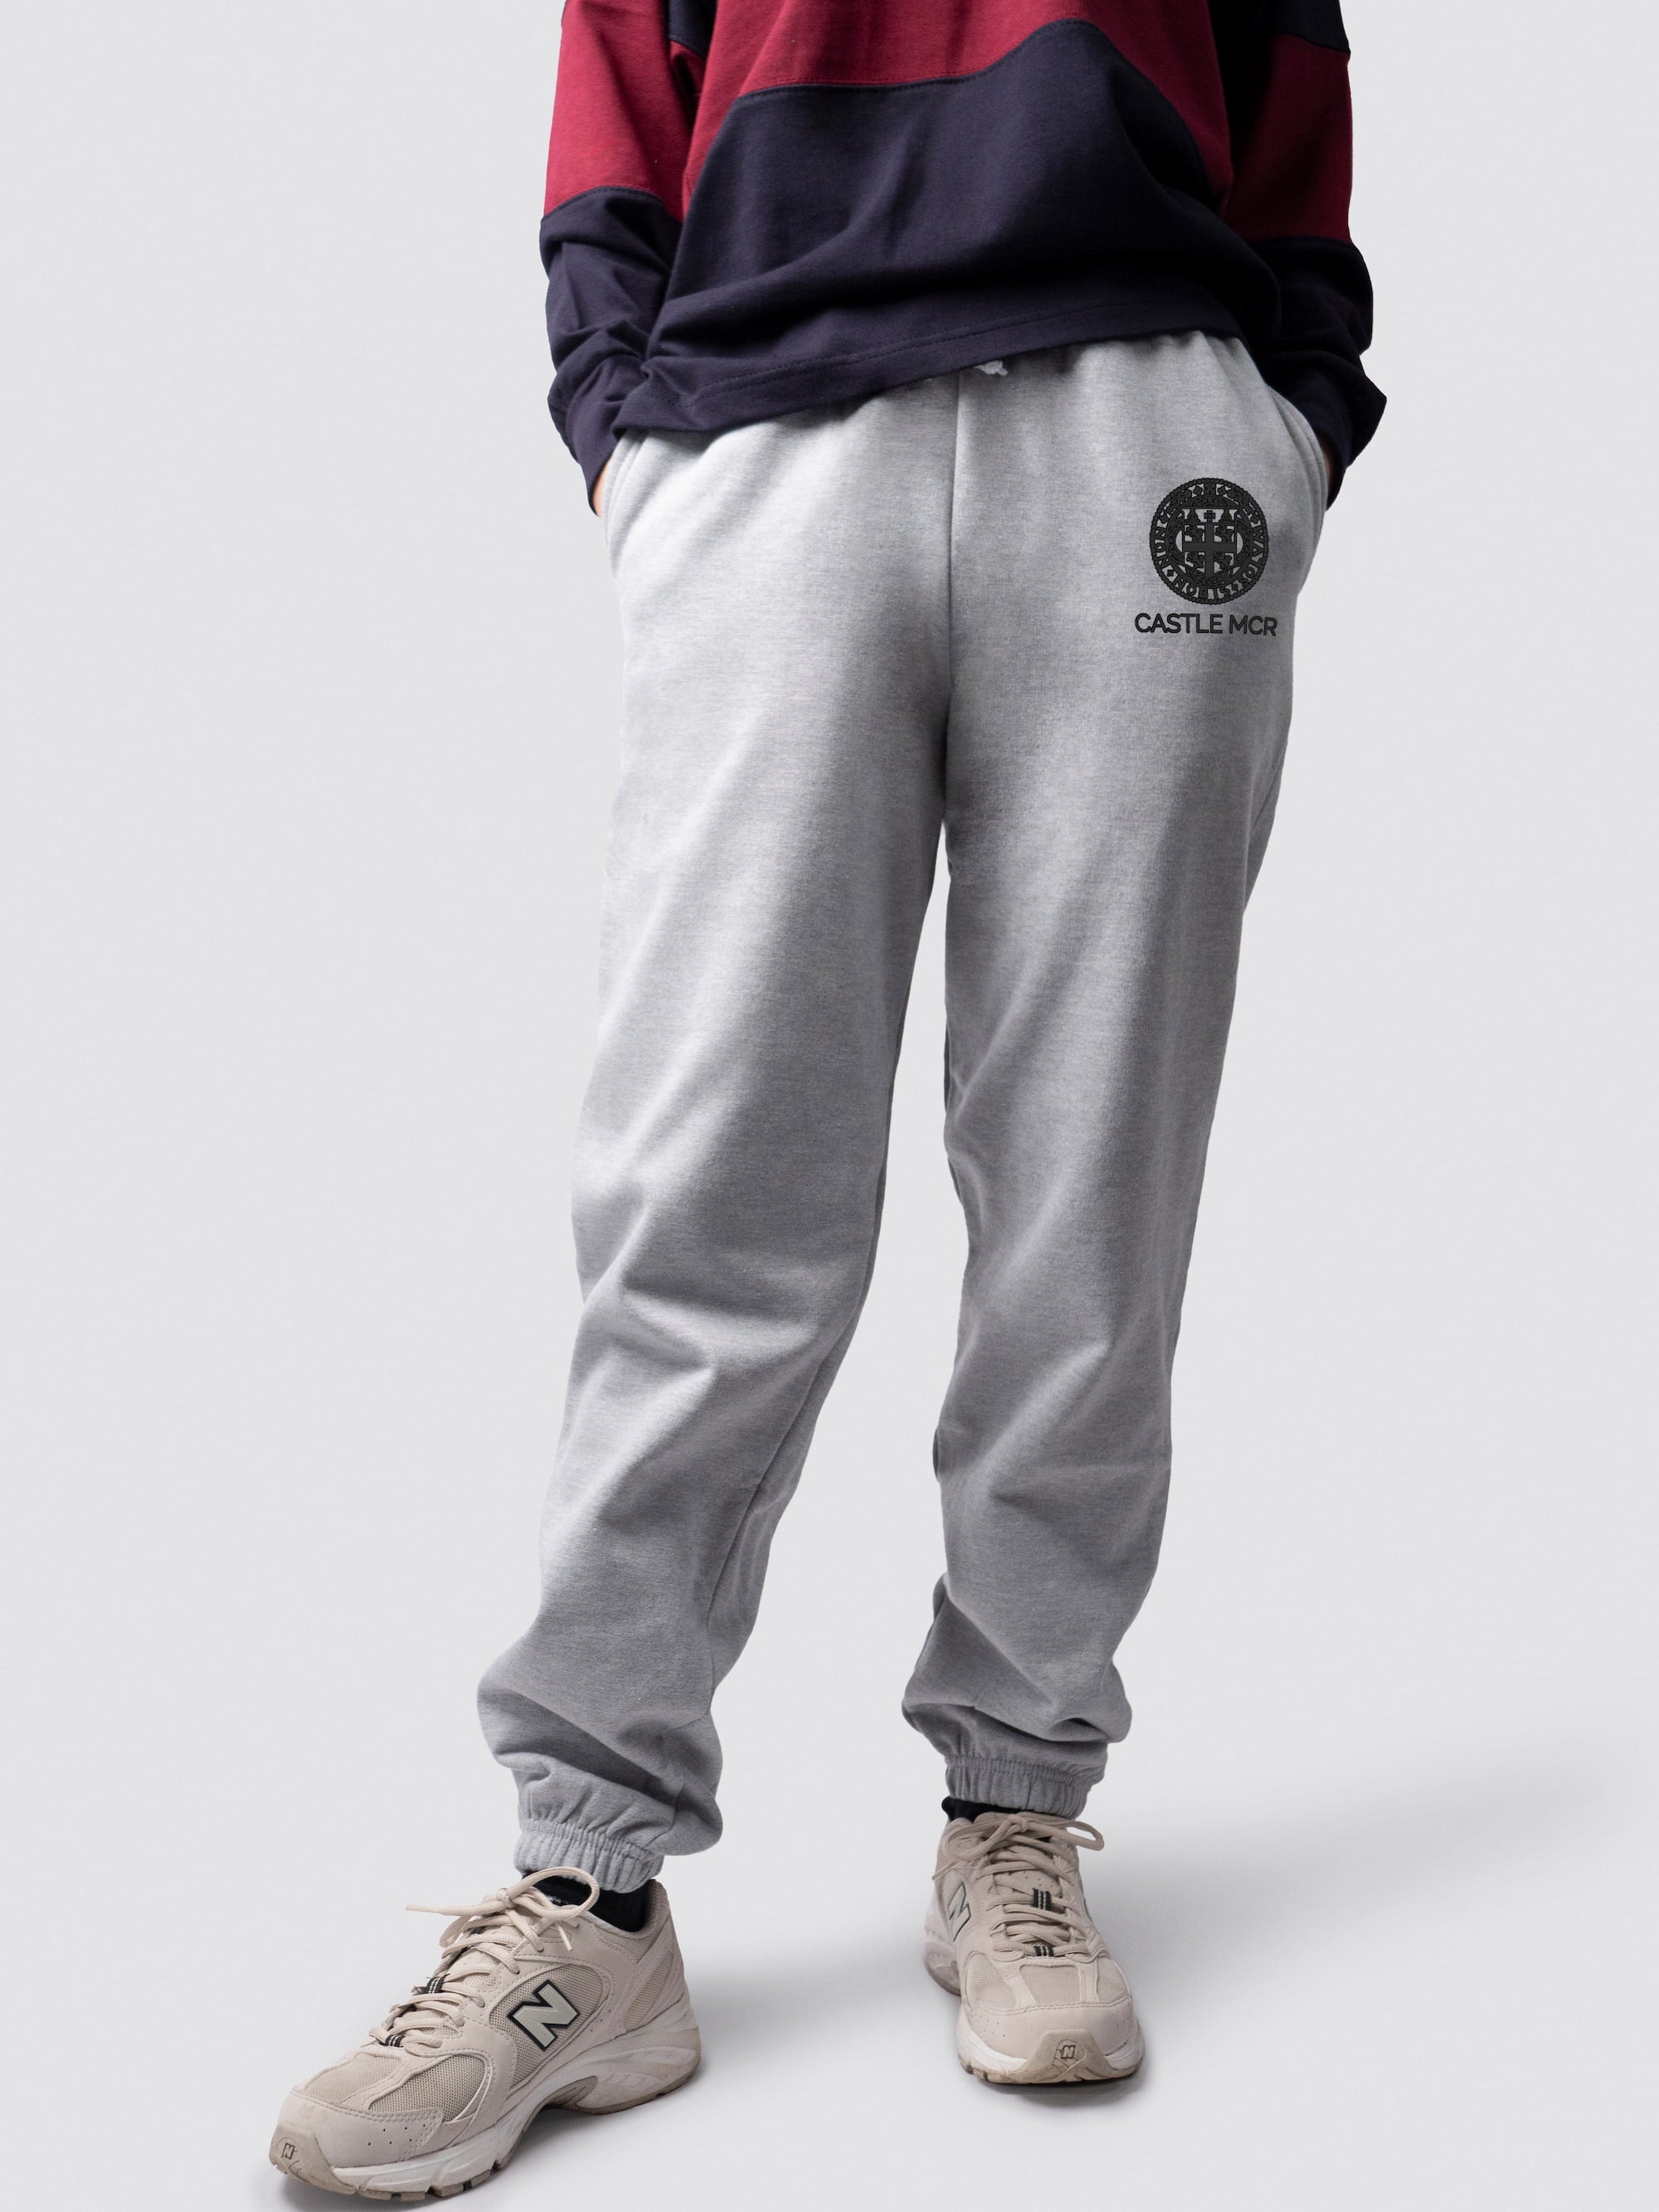 undergraduate cuffed sweatpants, made from soft cotton fabric, with Castle MCR logo